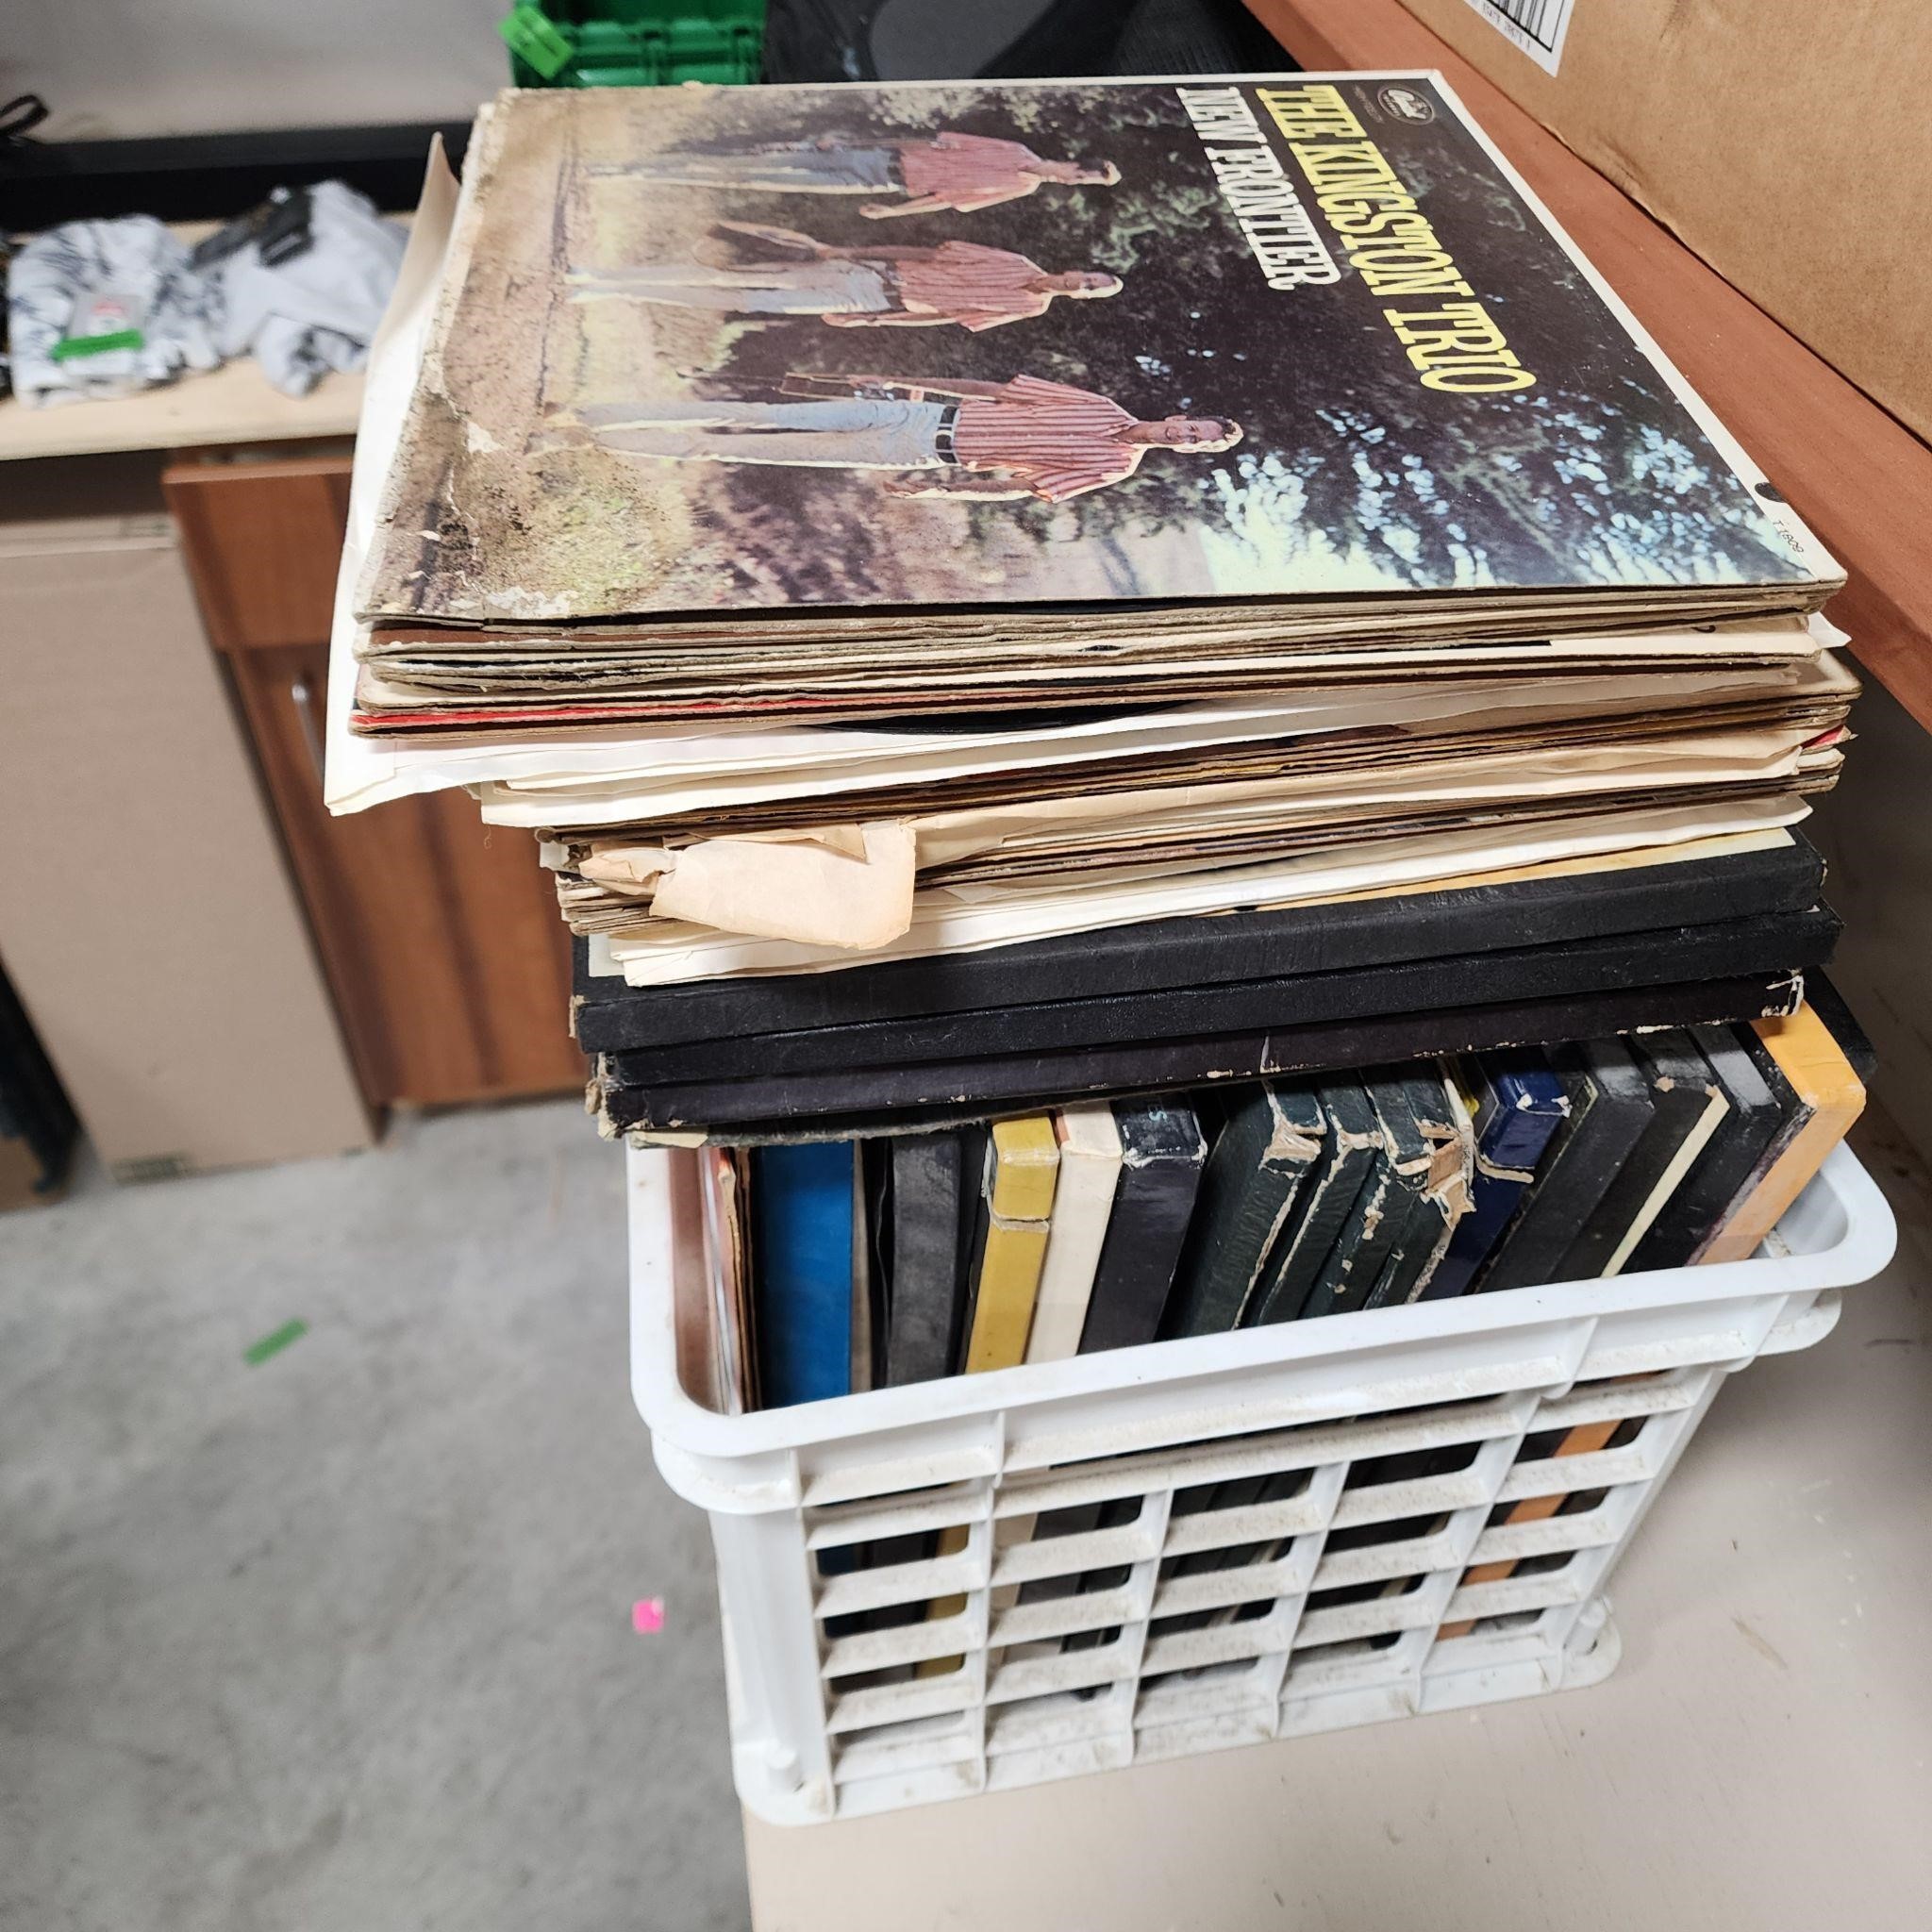 Crate full of albums